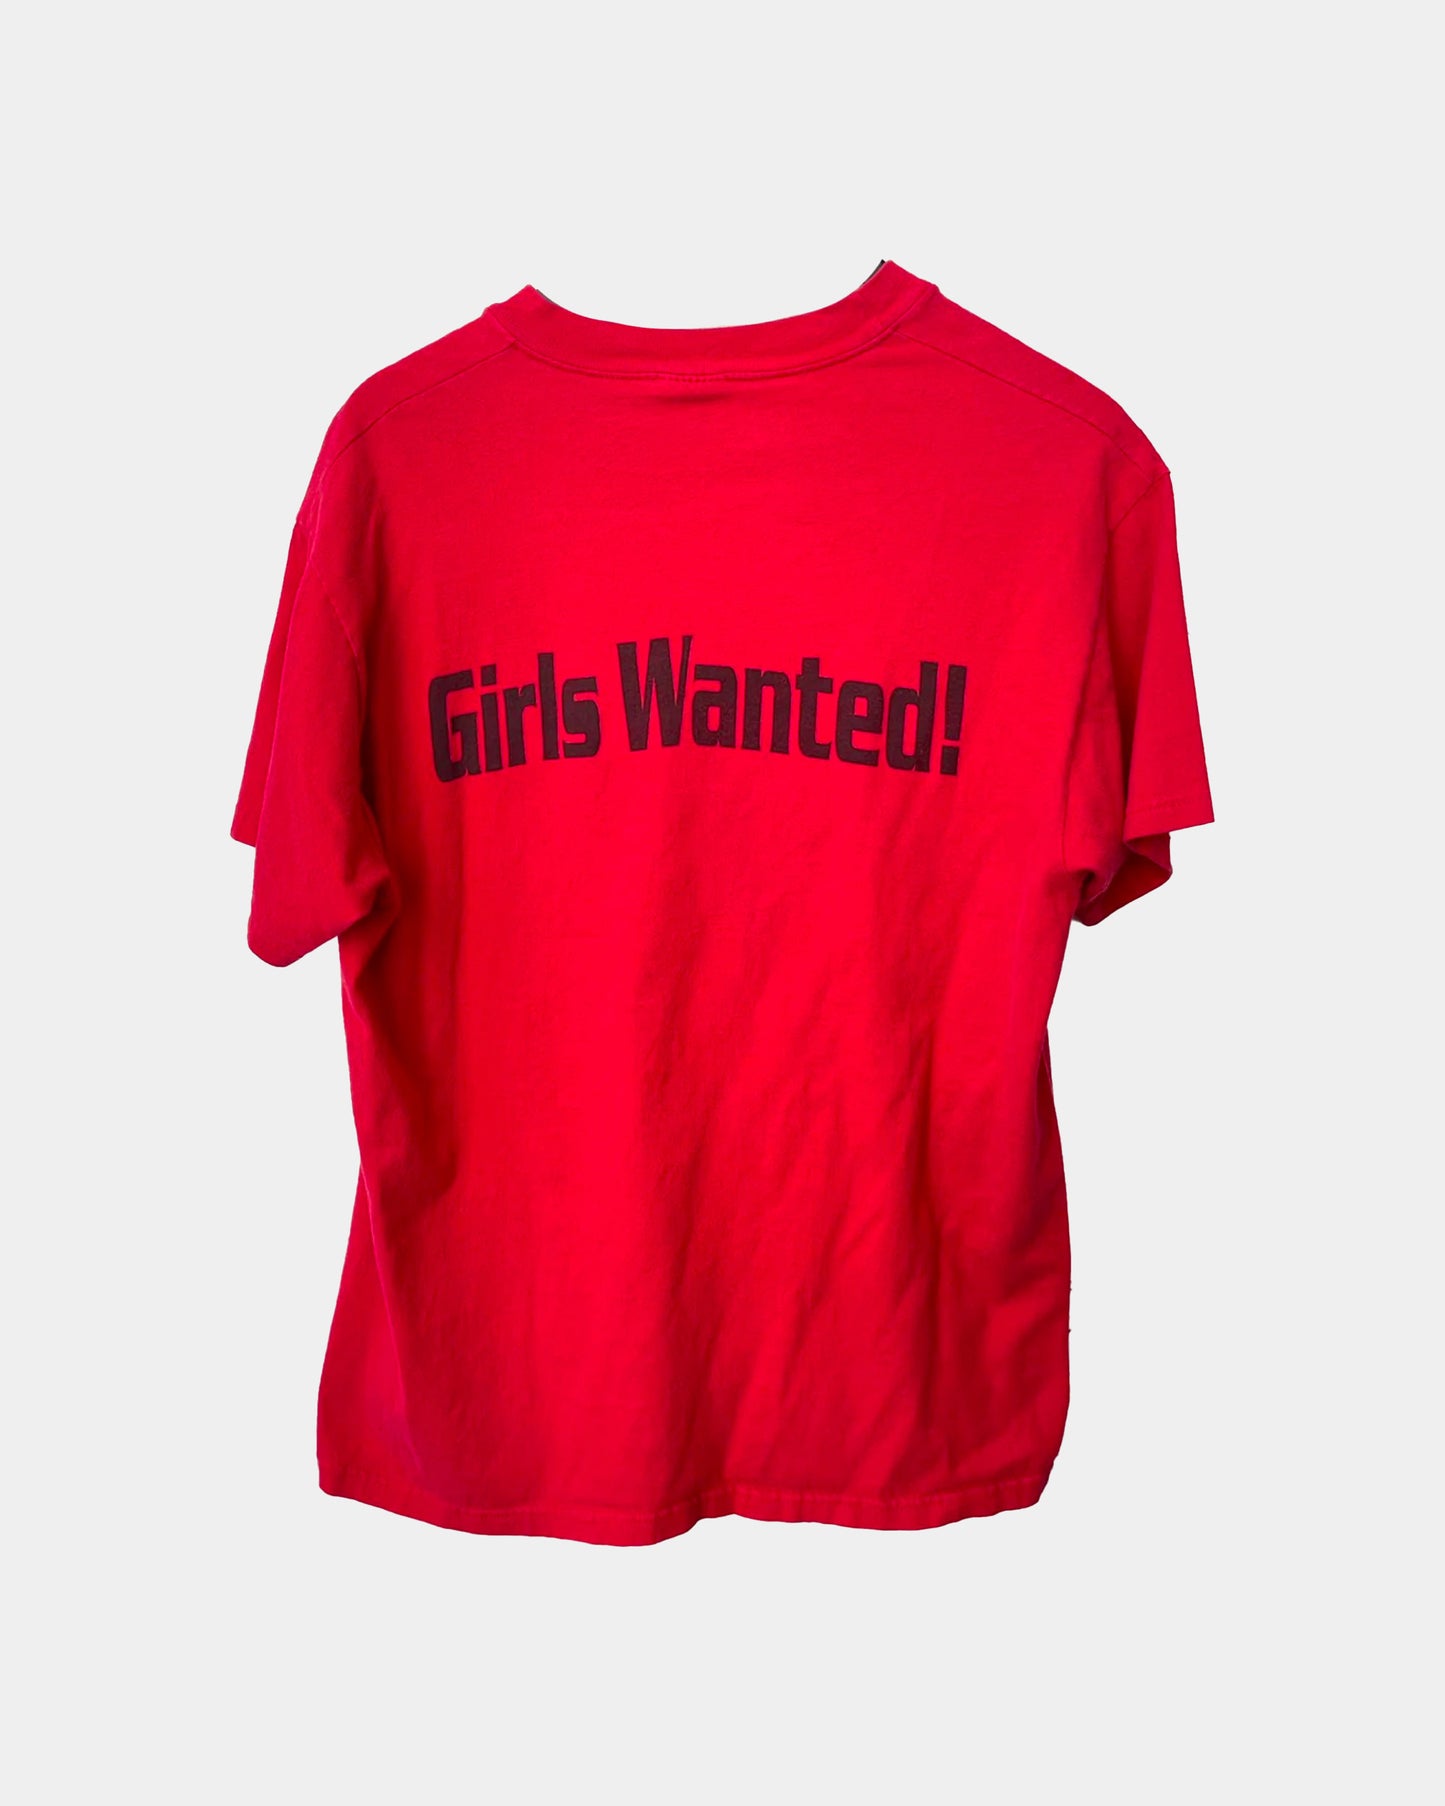 Vintage 90s GIRLS WANTED PORNO PORN SHIRT 4Gseller